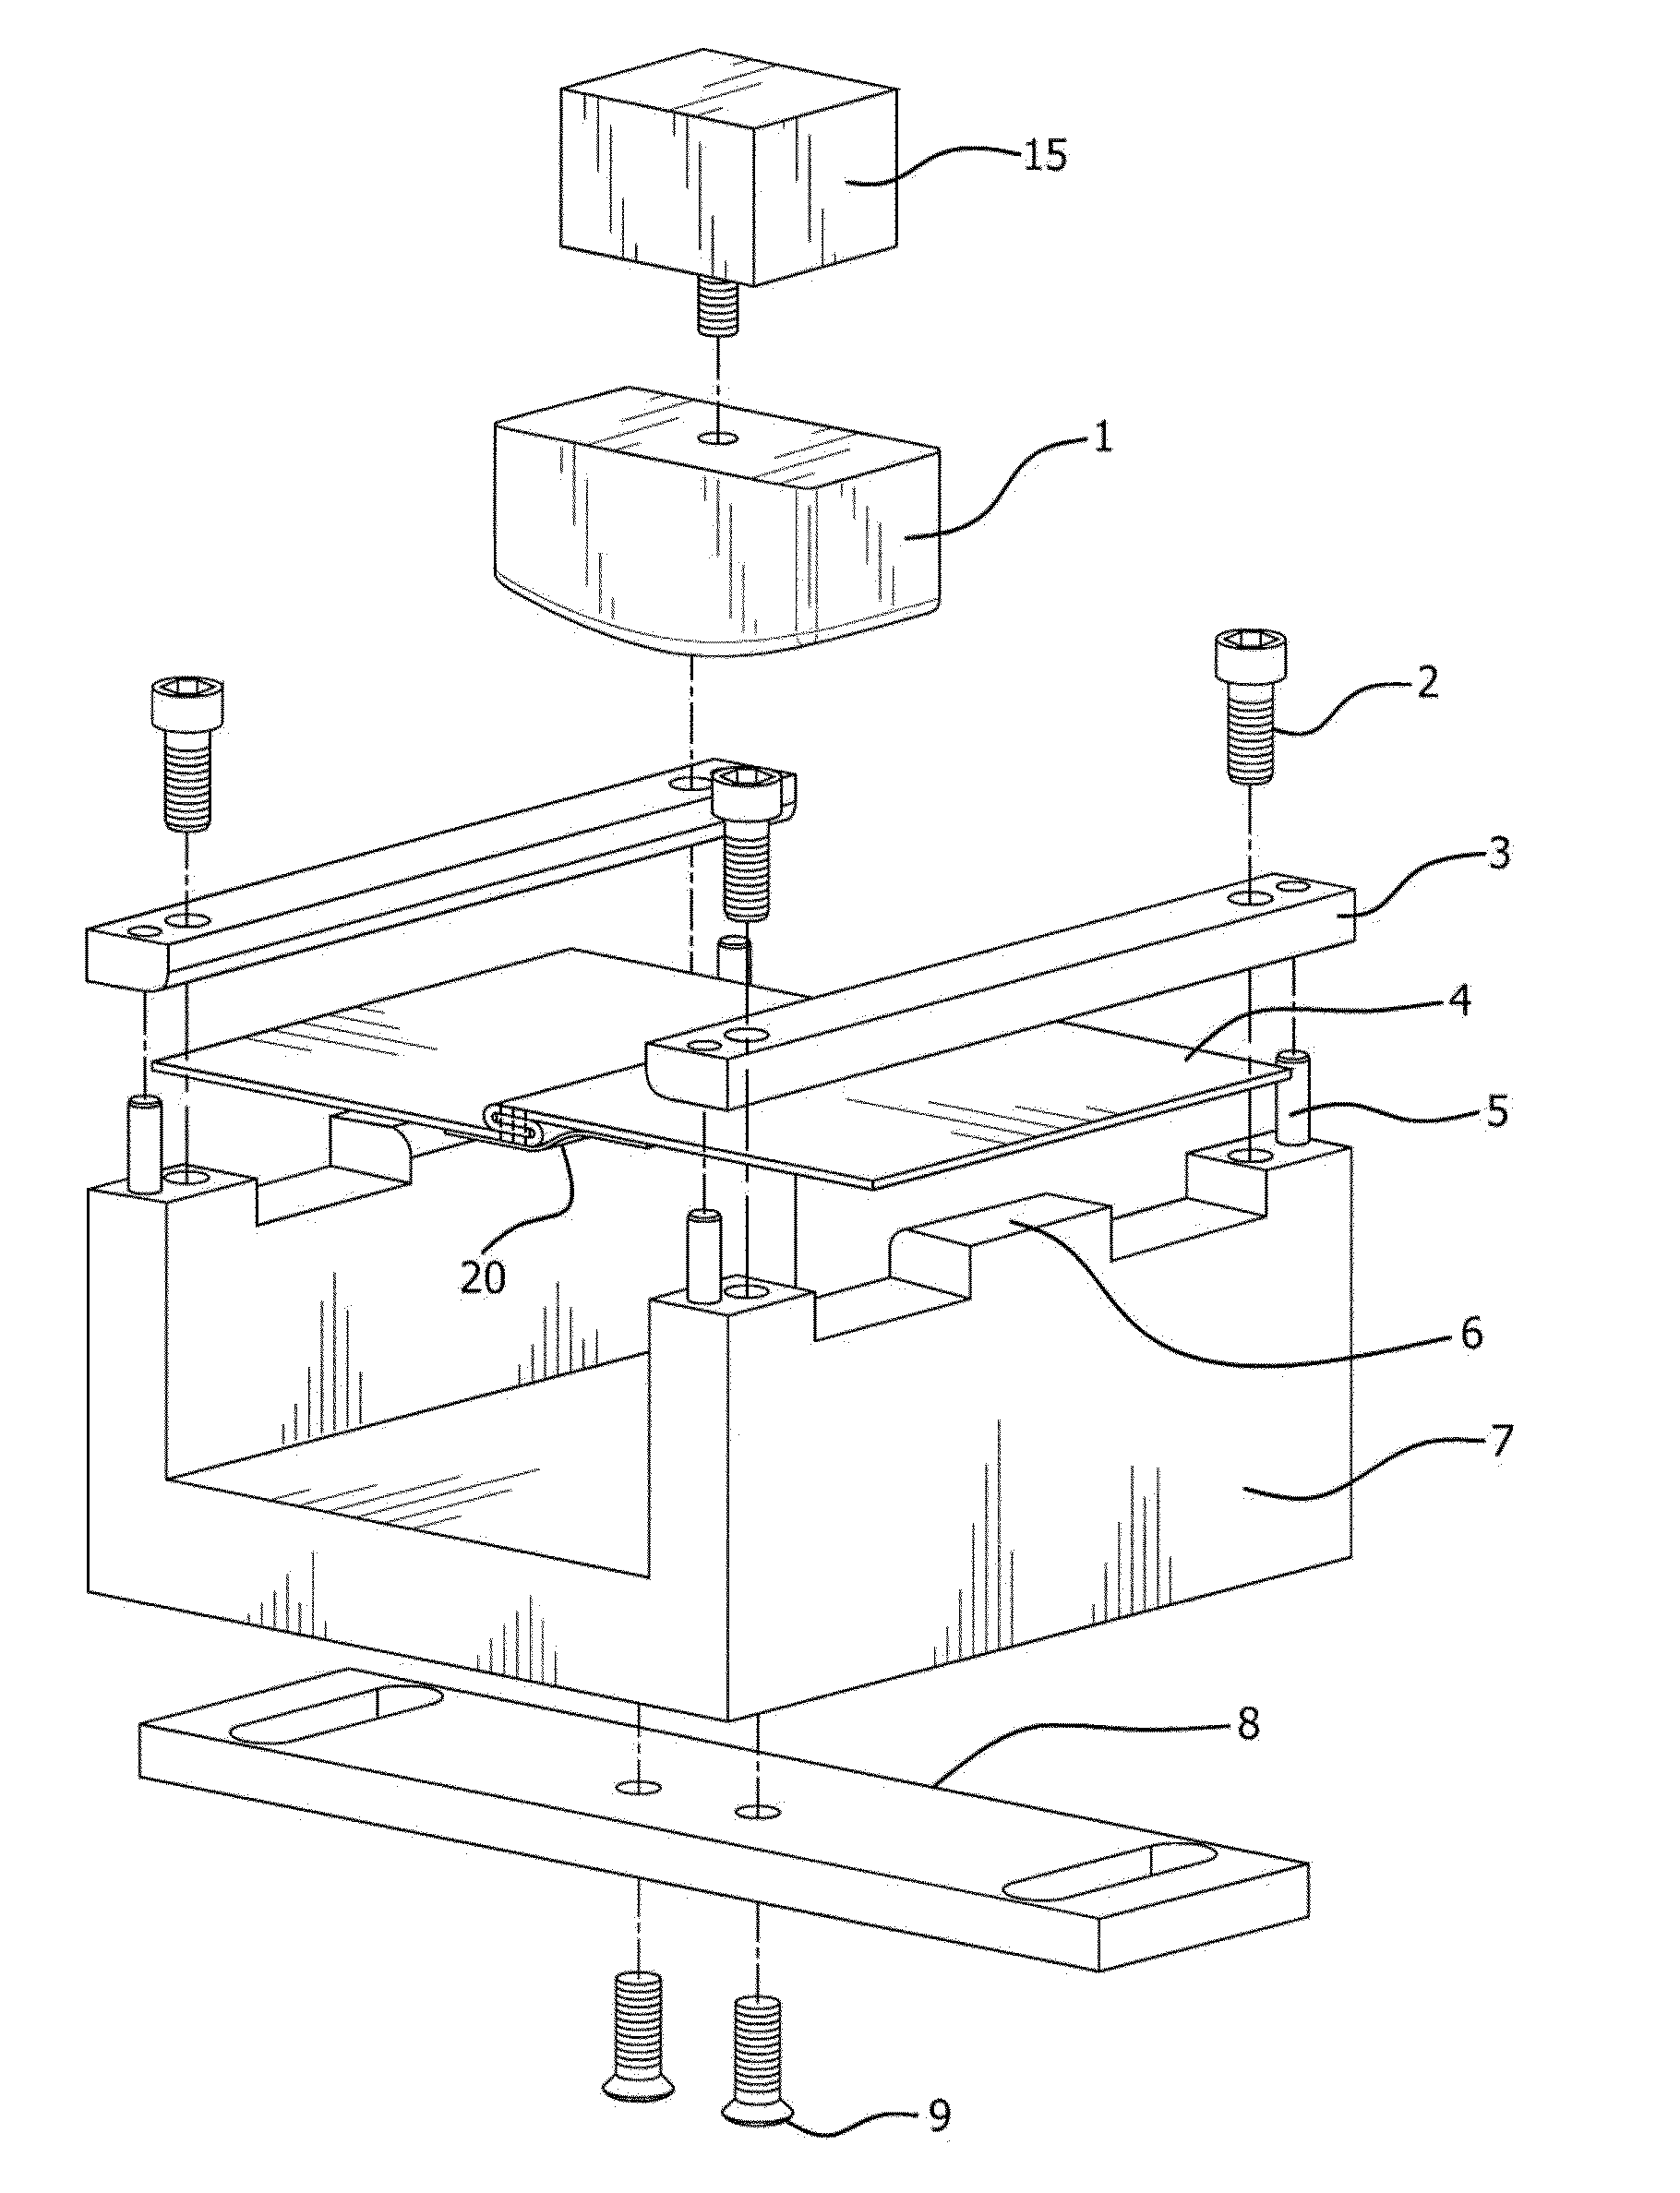 Seam-sealed filters and methods of making thereof